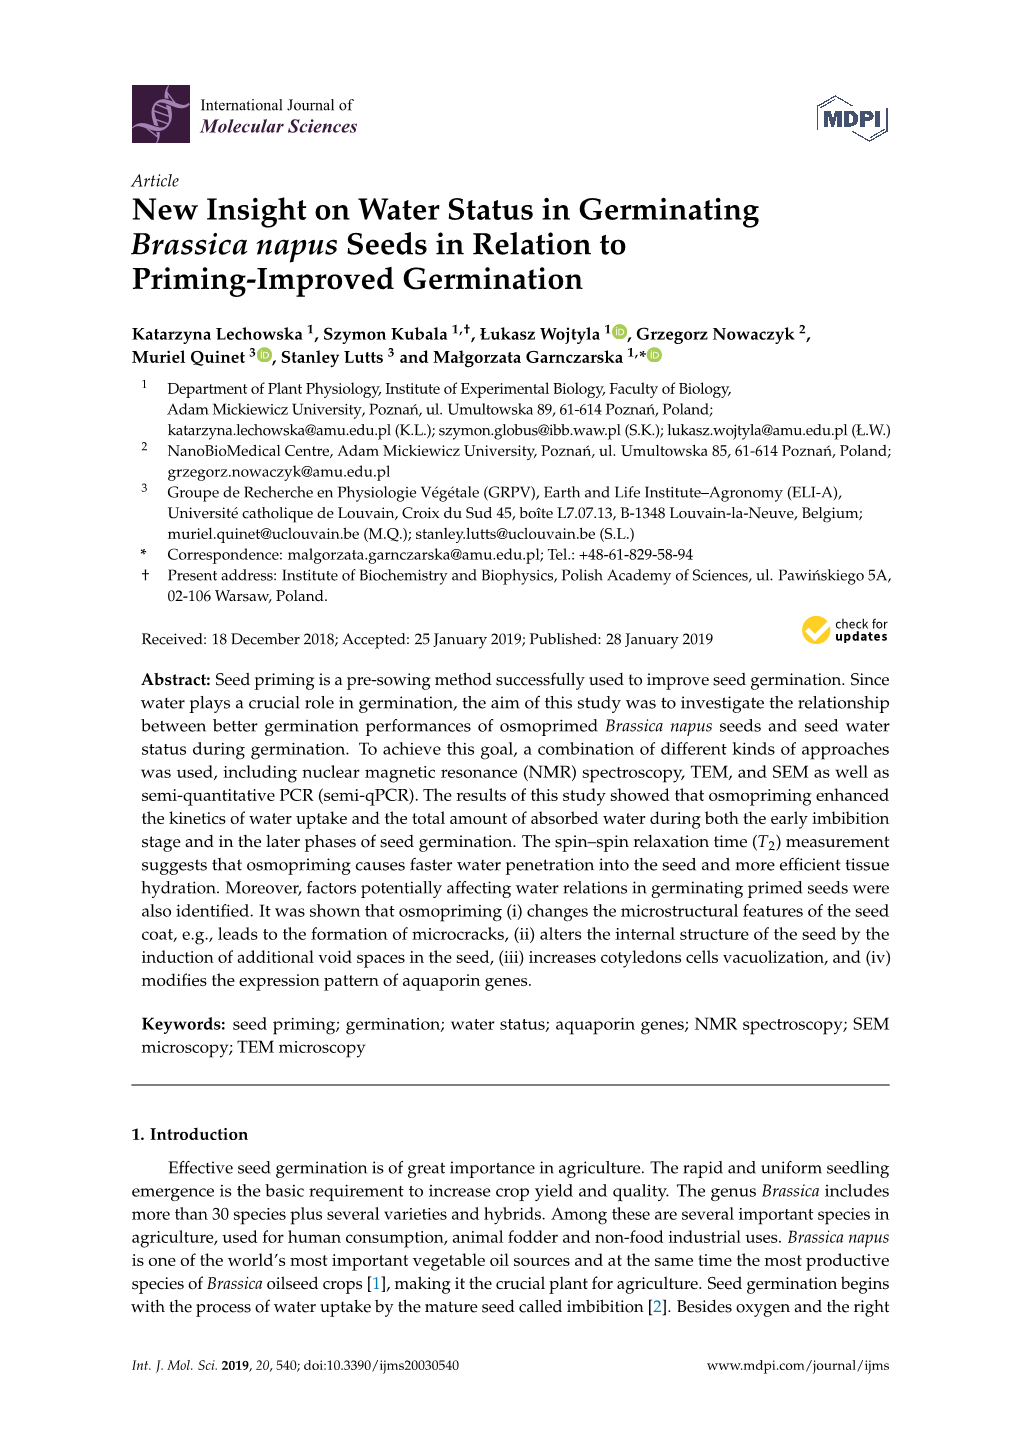 New Insight on Water Status in Germinating Brassica Napus Seeds in Relation to Priming-Improved Germination